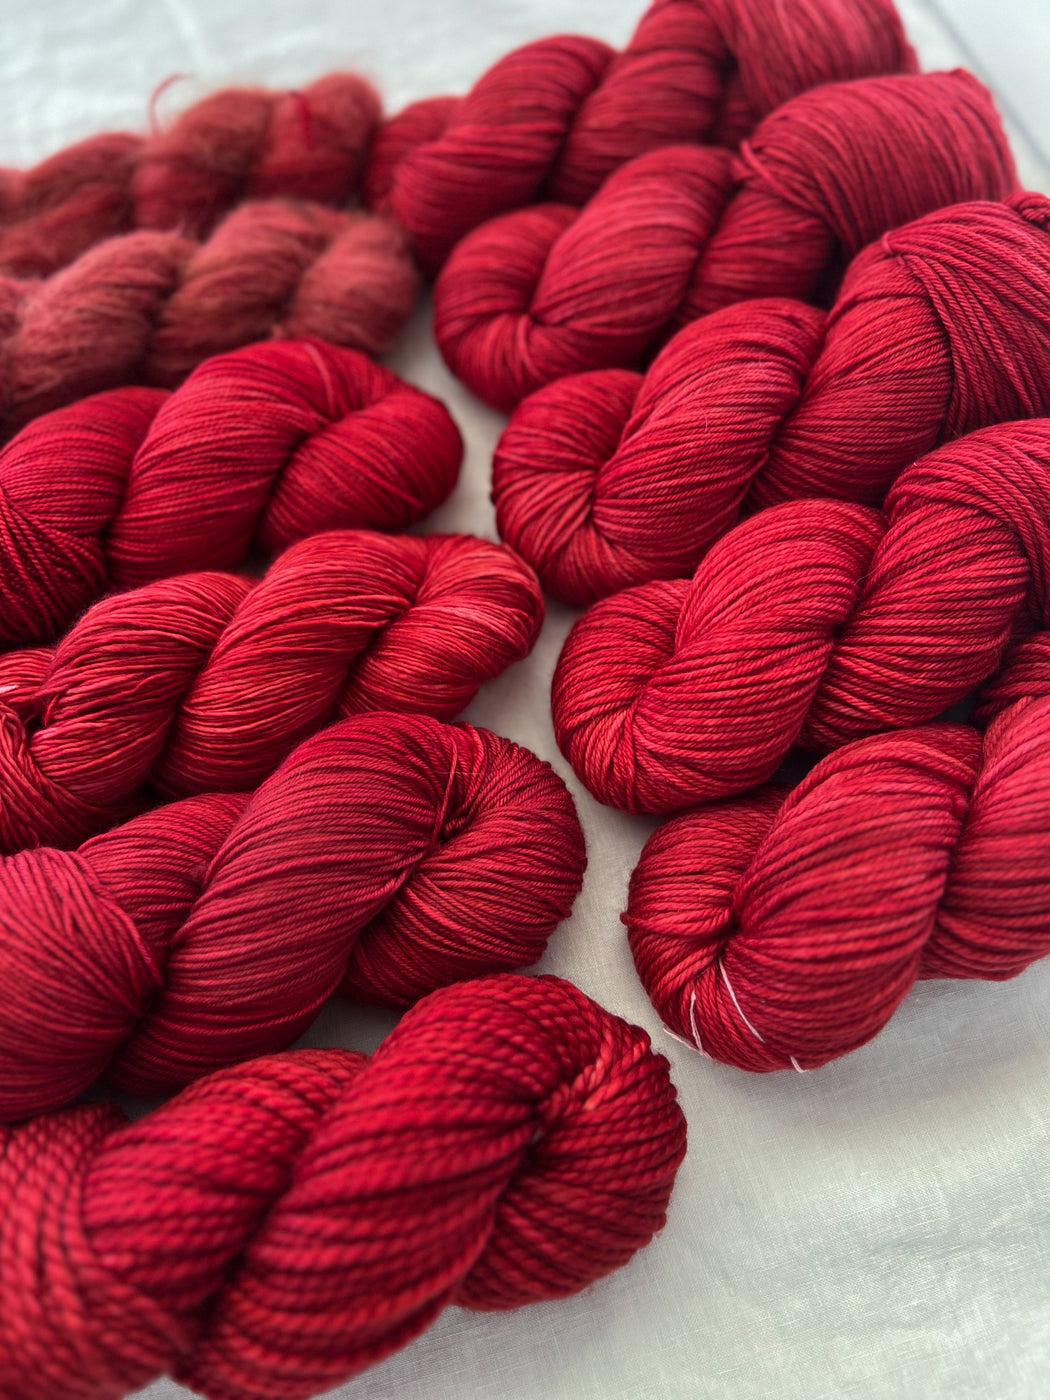 Terracotta - Ruby and Roses Yarn - Hand Dyed Yarn